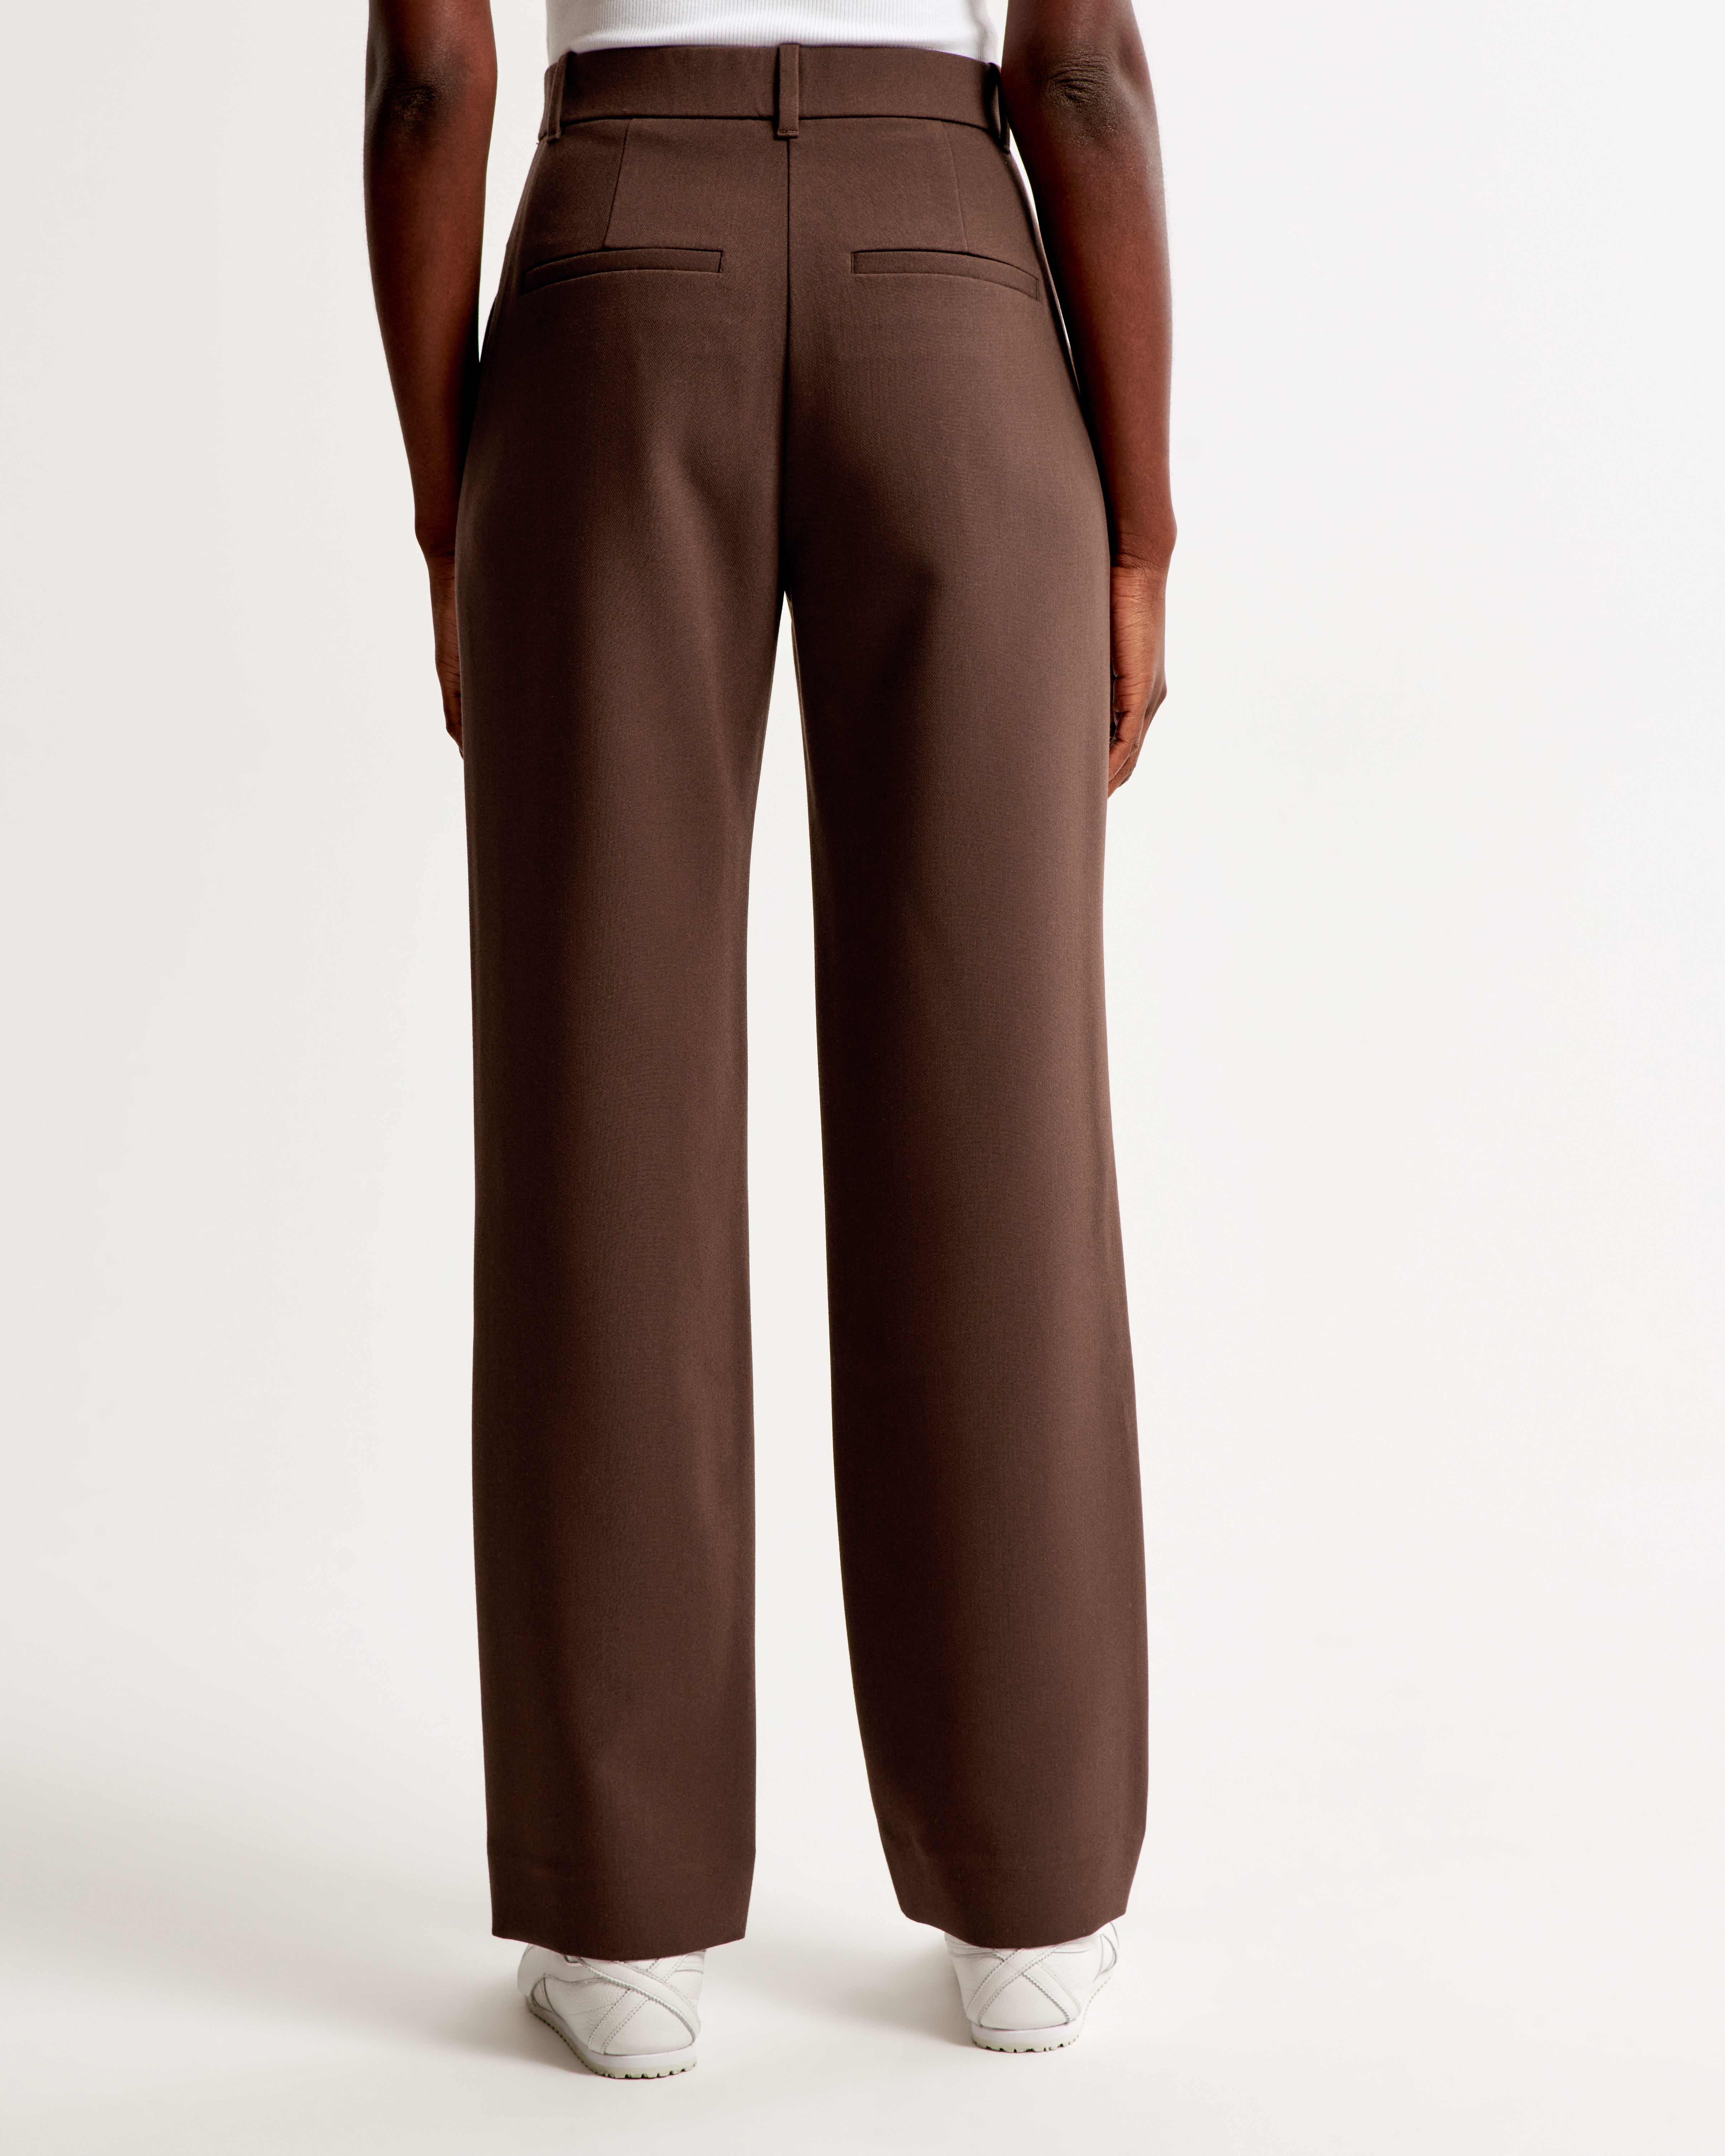 Women's Tailored Relaxed Straight Pant | Women's Bottoms